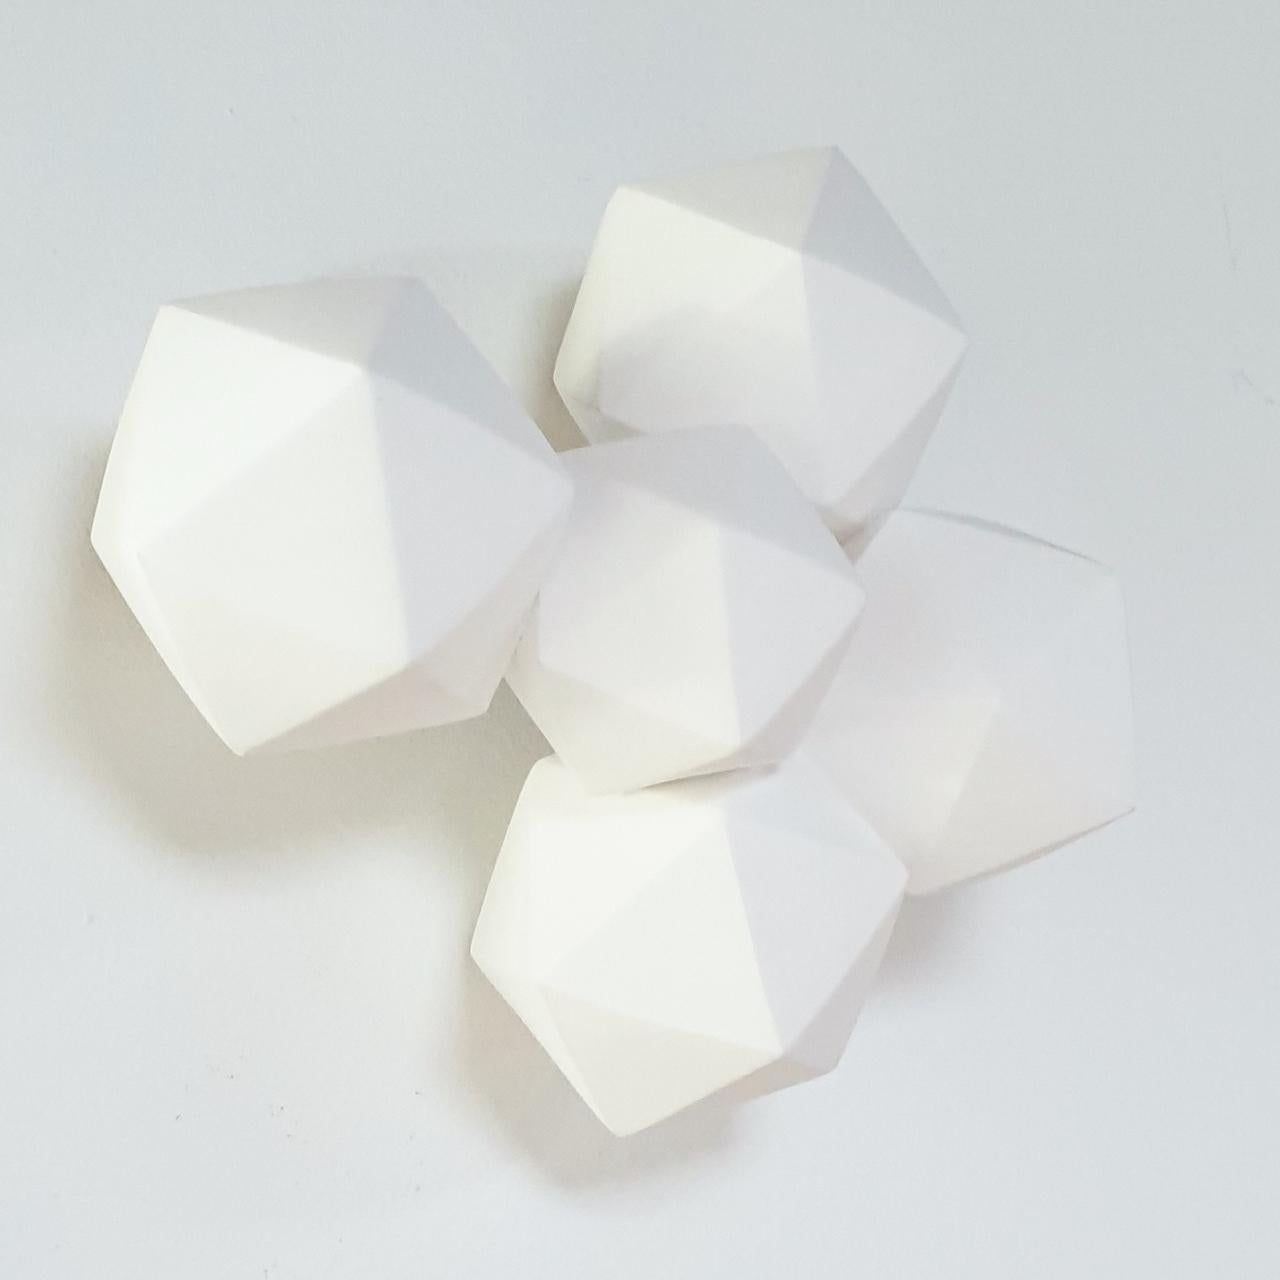 Icosahedron 5 - contemporary modern abstract geometric ceramic wall sculpture - Contemporary Sculpture by Mo Cornelisse